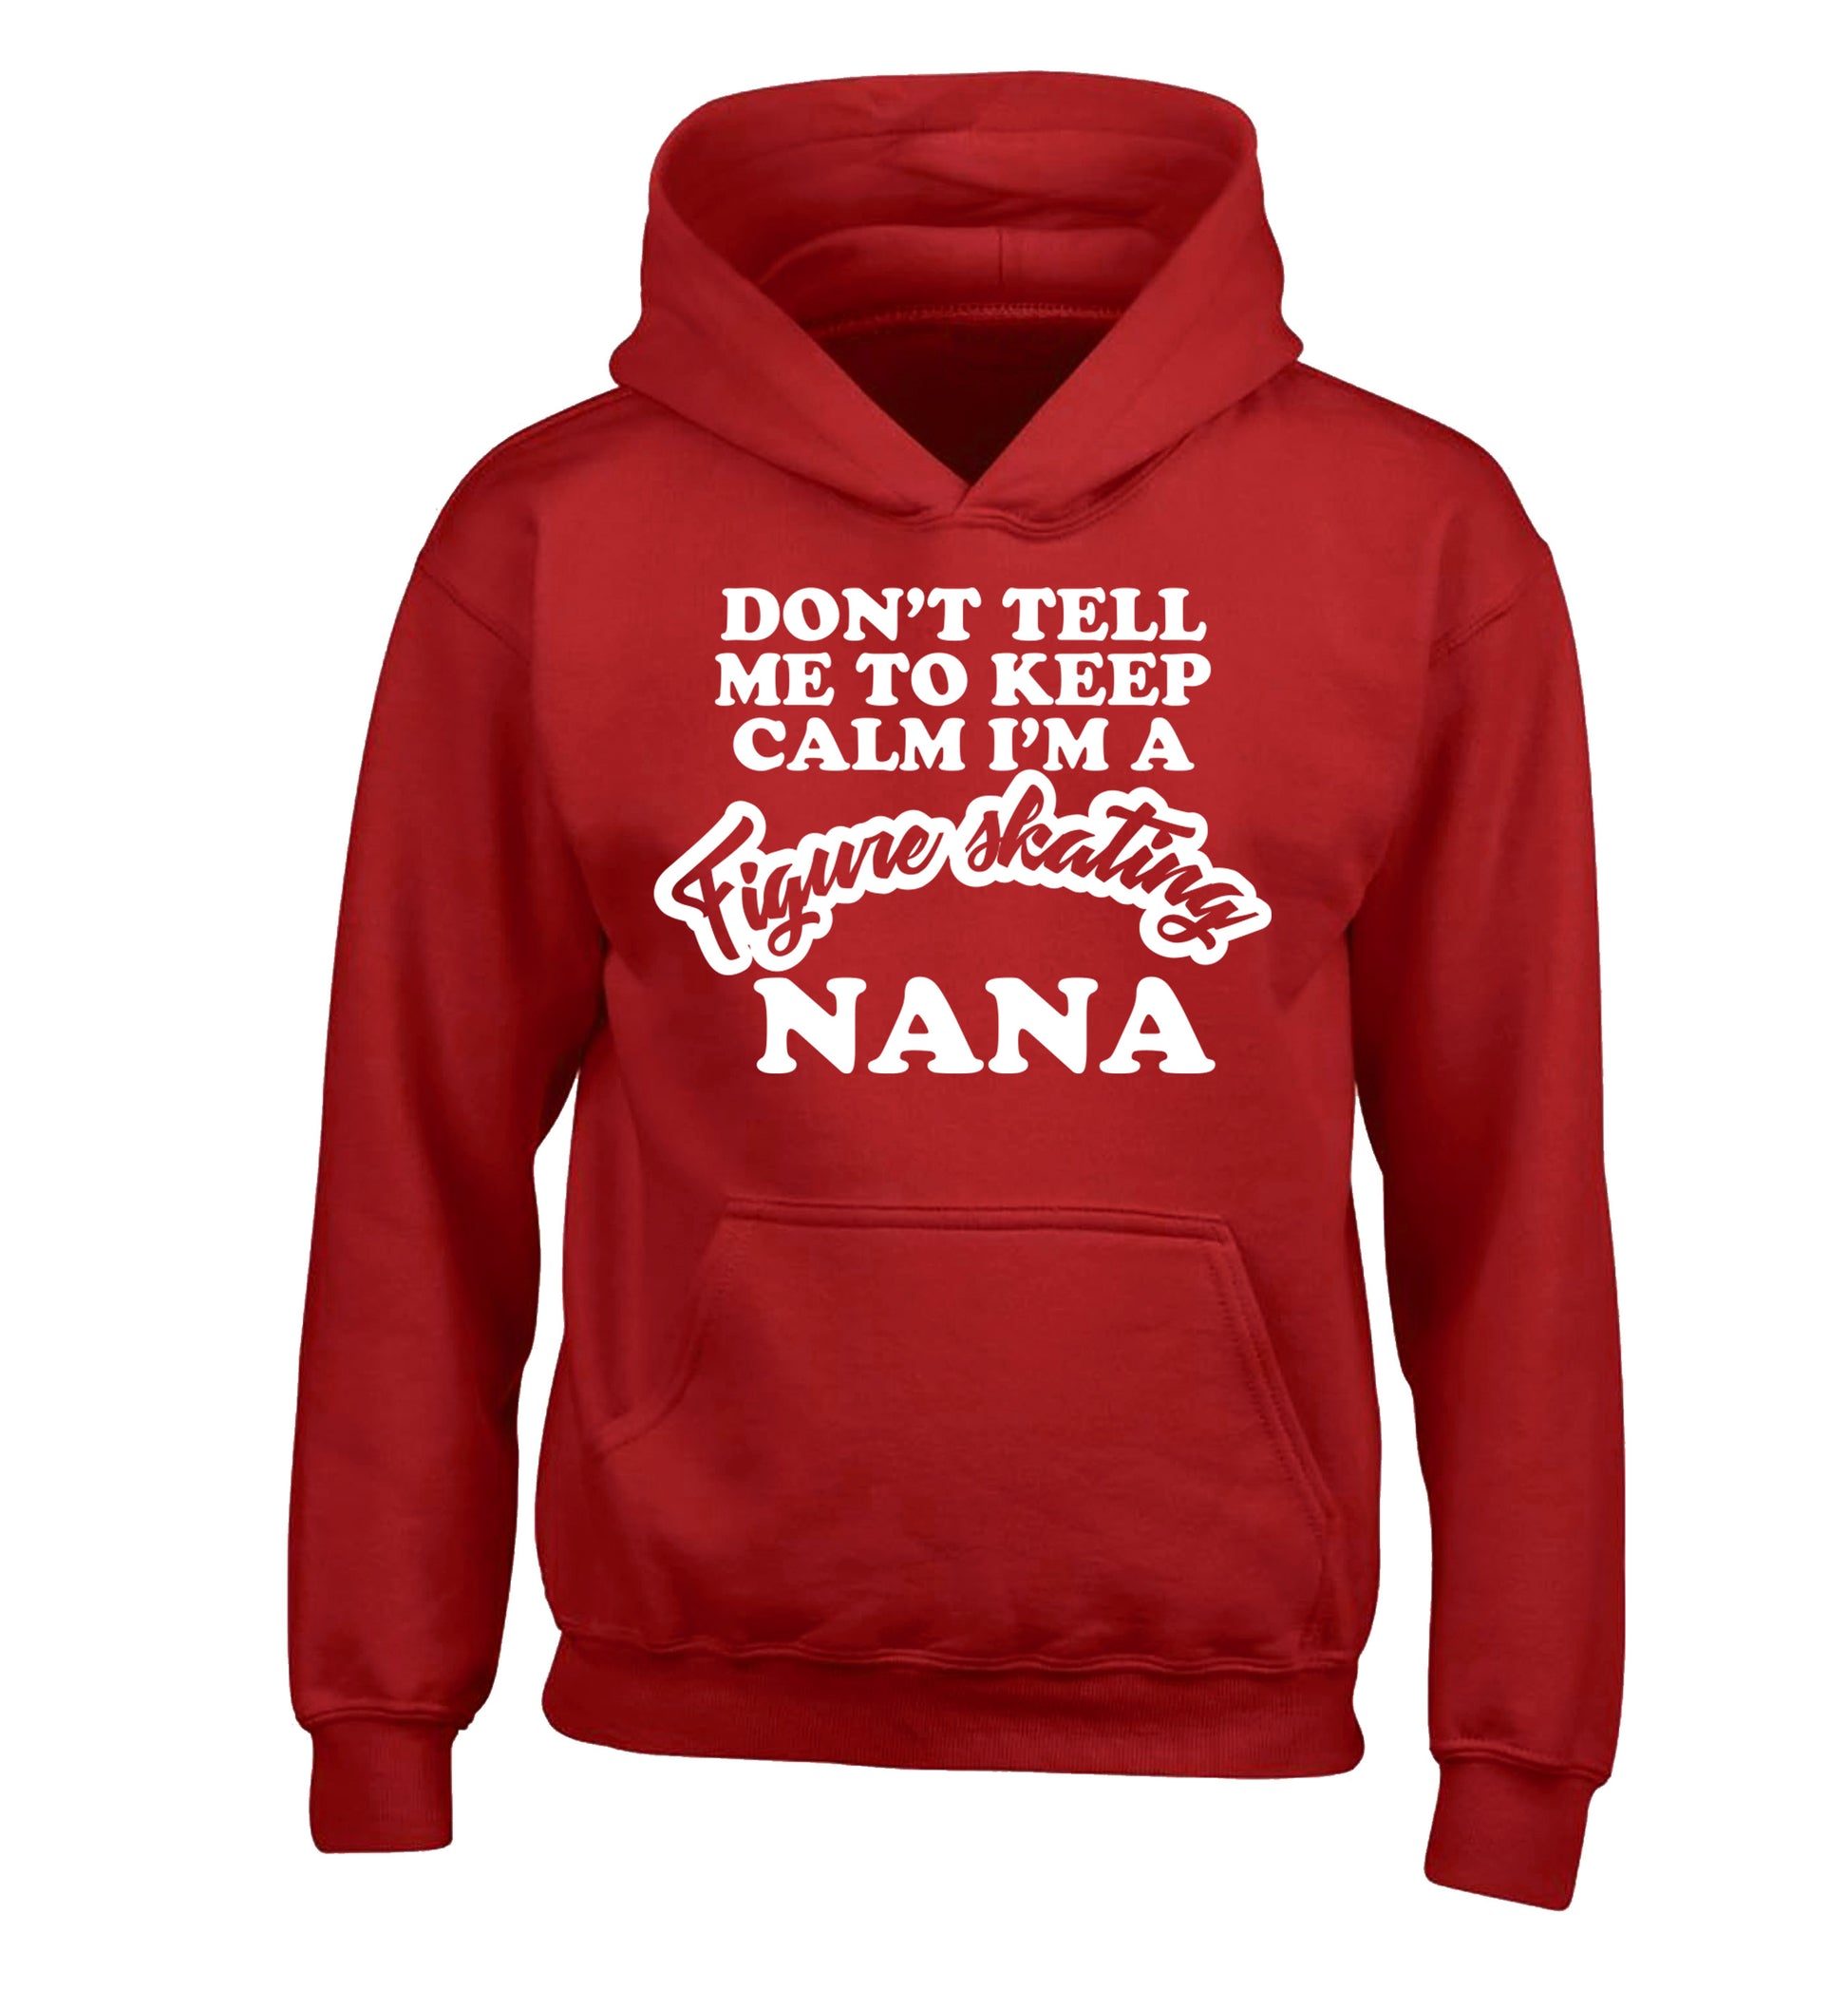 Don't tell me to keep calm I'm a figure skating nana children's red hoodie 12-14 Years